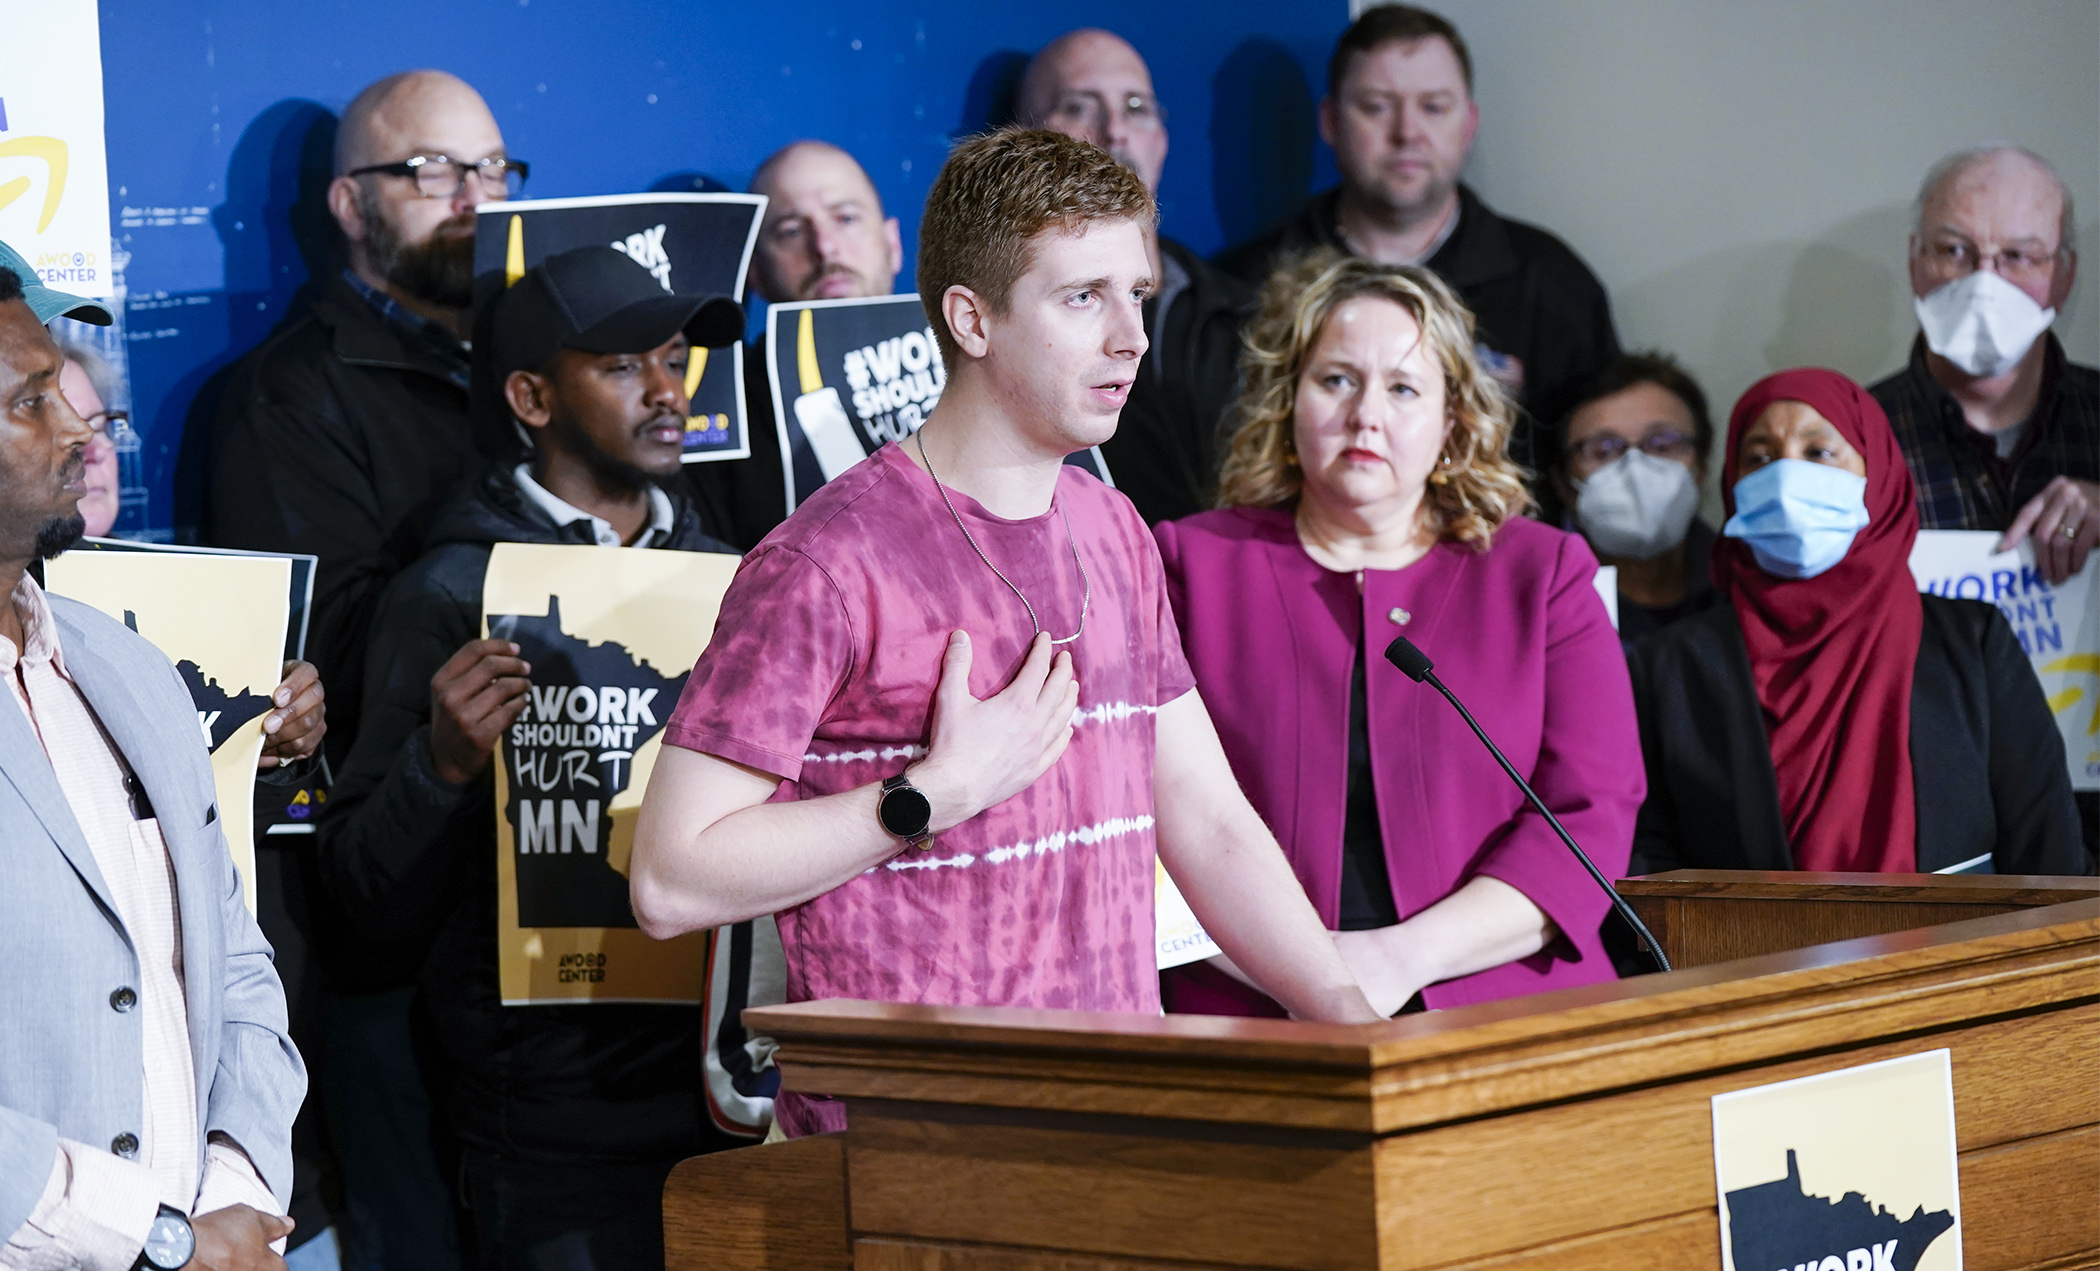 Tyler Hamilton, who has worked at a local Amazon facility for 4 1/2 years, describes the work environment during a March 28 news conference ahead of House debate on HF2774. (Photo by Paul Battaglia)